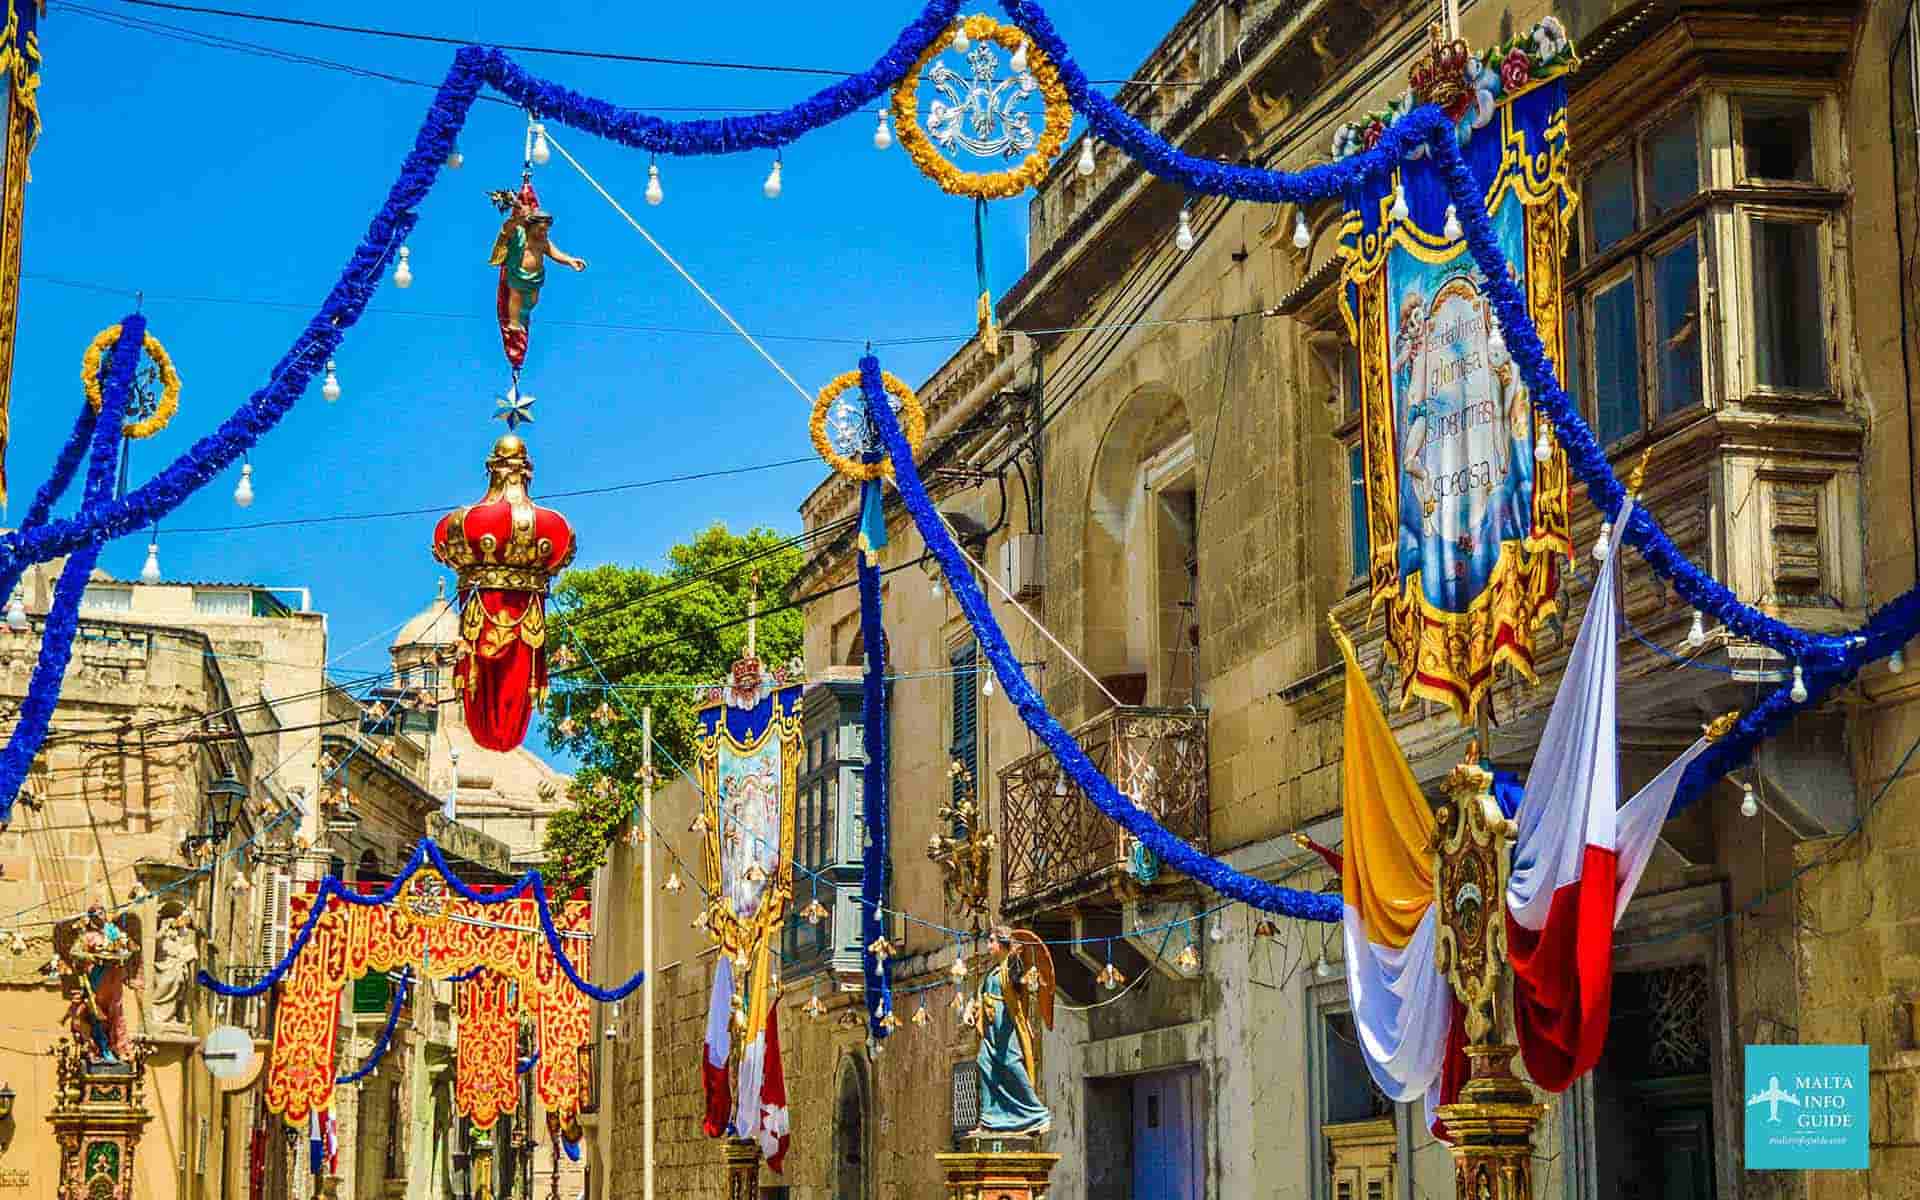 Decorations at one of the village feasts in Gozo.